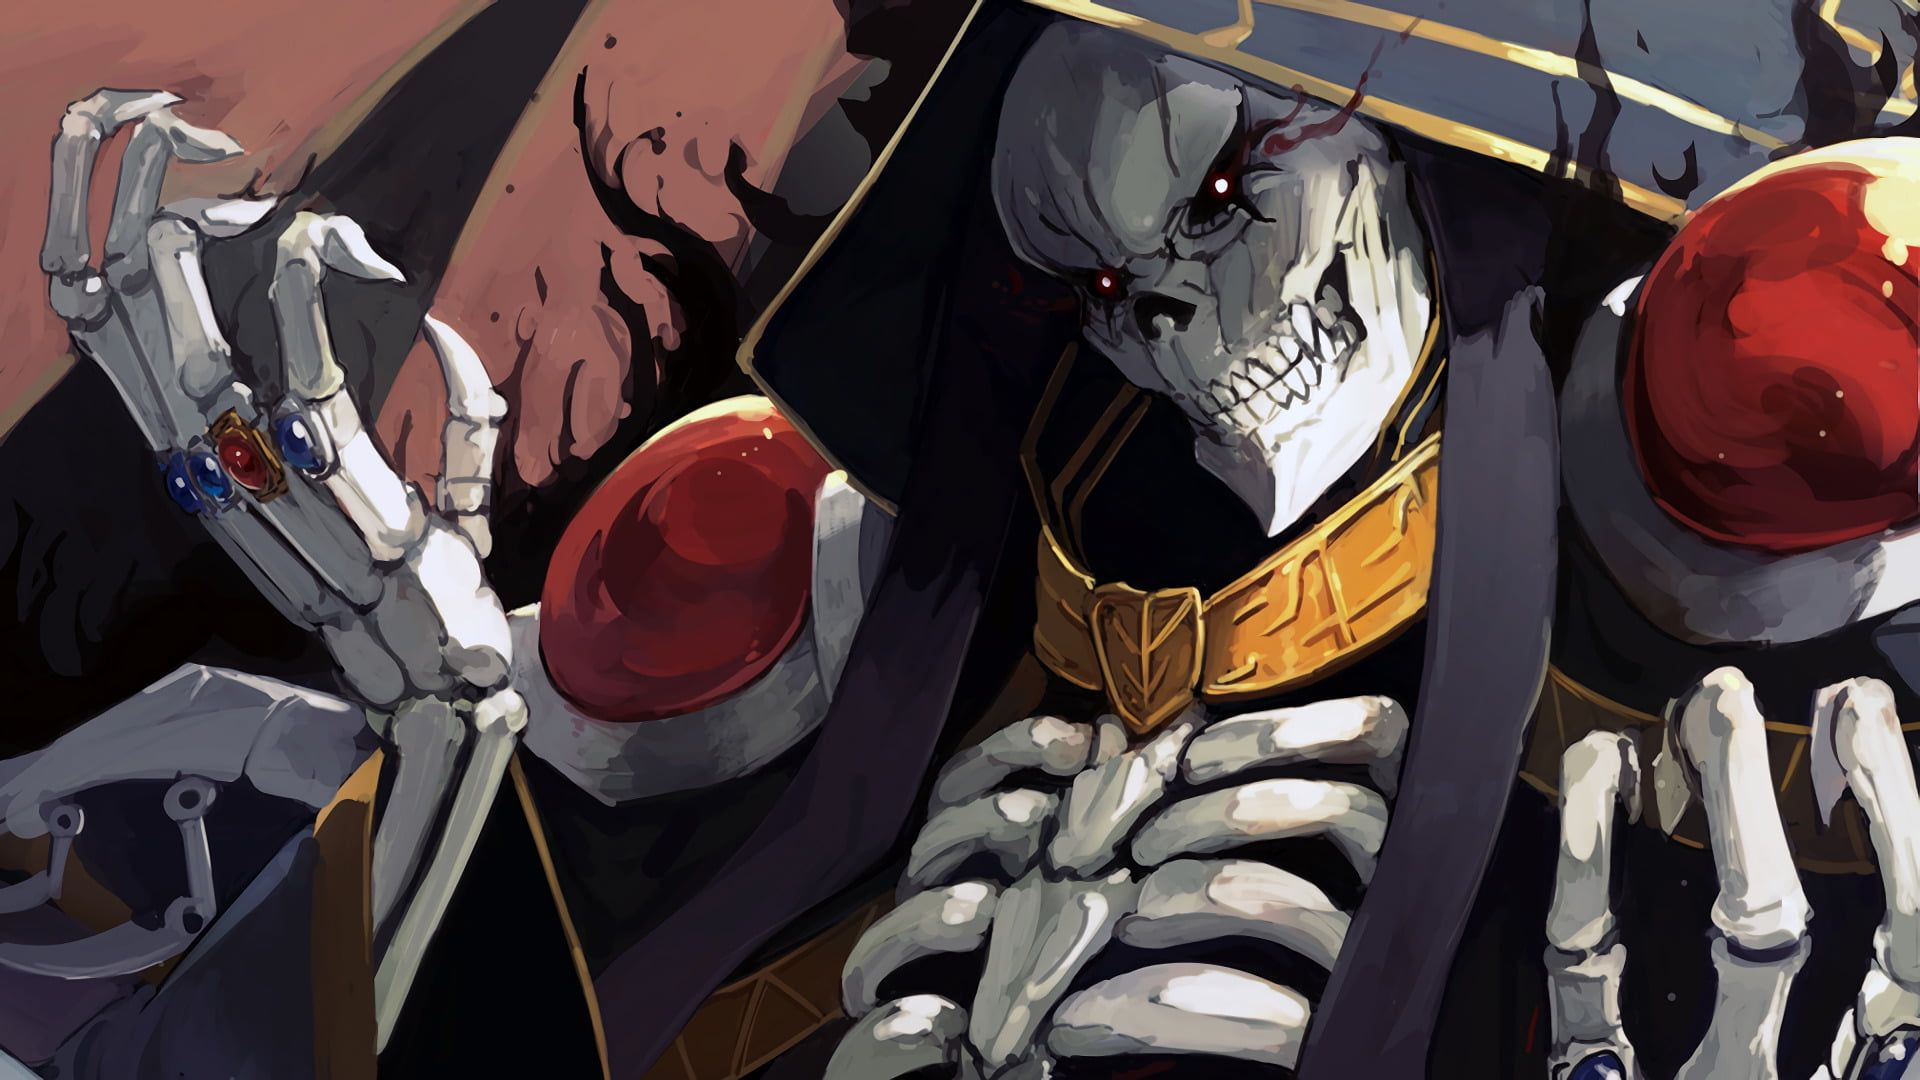 1920x1080 Anime #Overlord Ainz Ooal Gown #1080P #wallpaper #hdwallpaper #desktop | Anime, Hd wallpaper, Character wallpaper